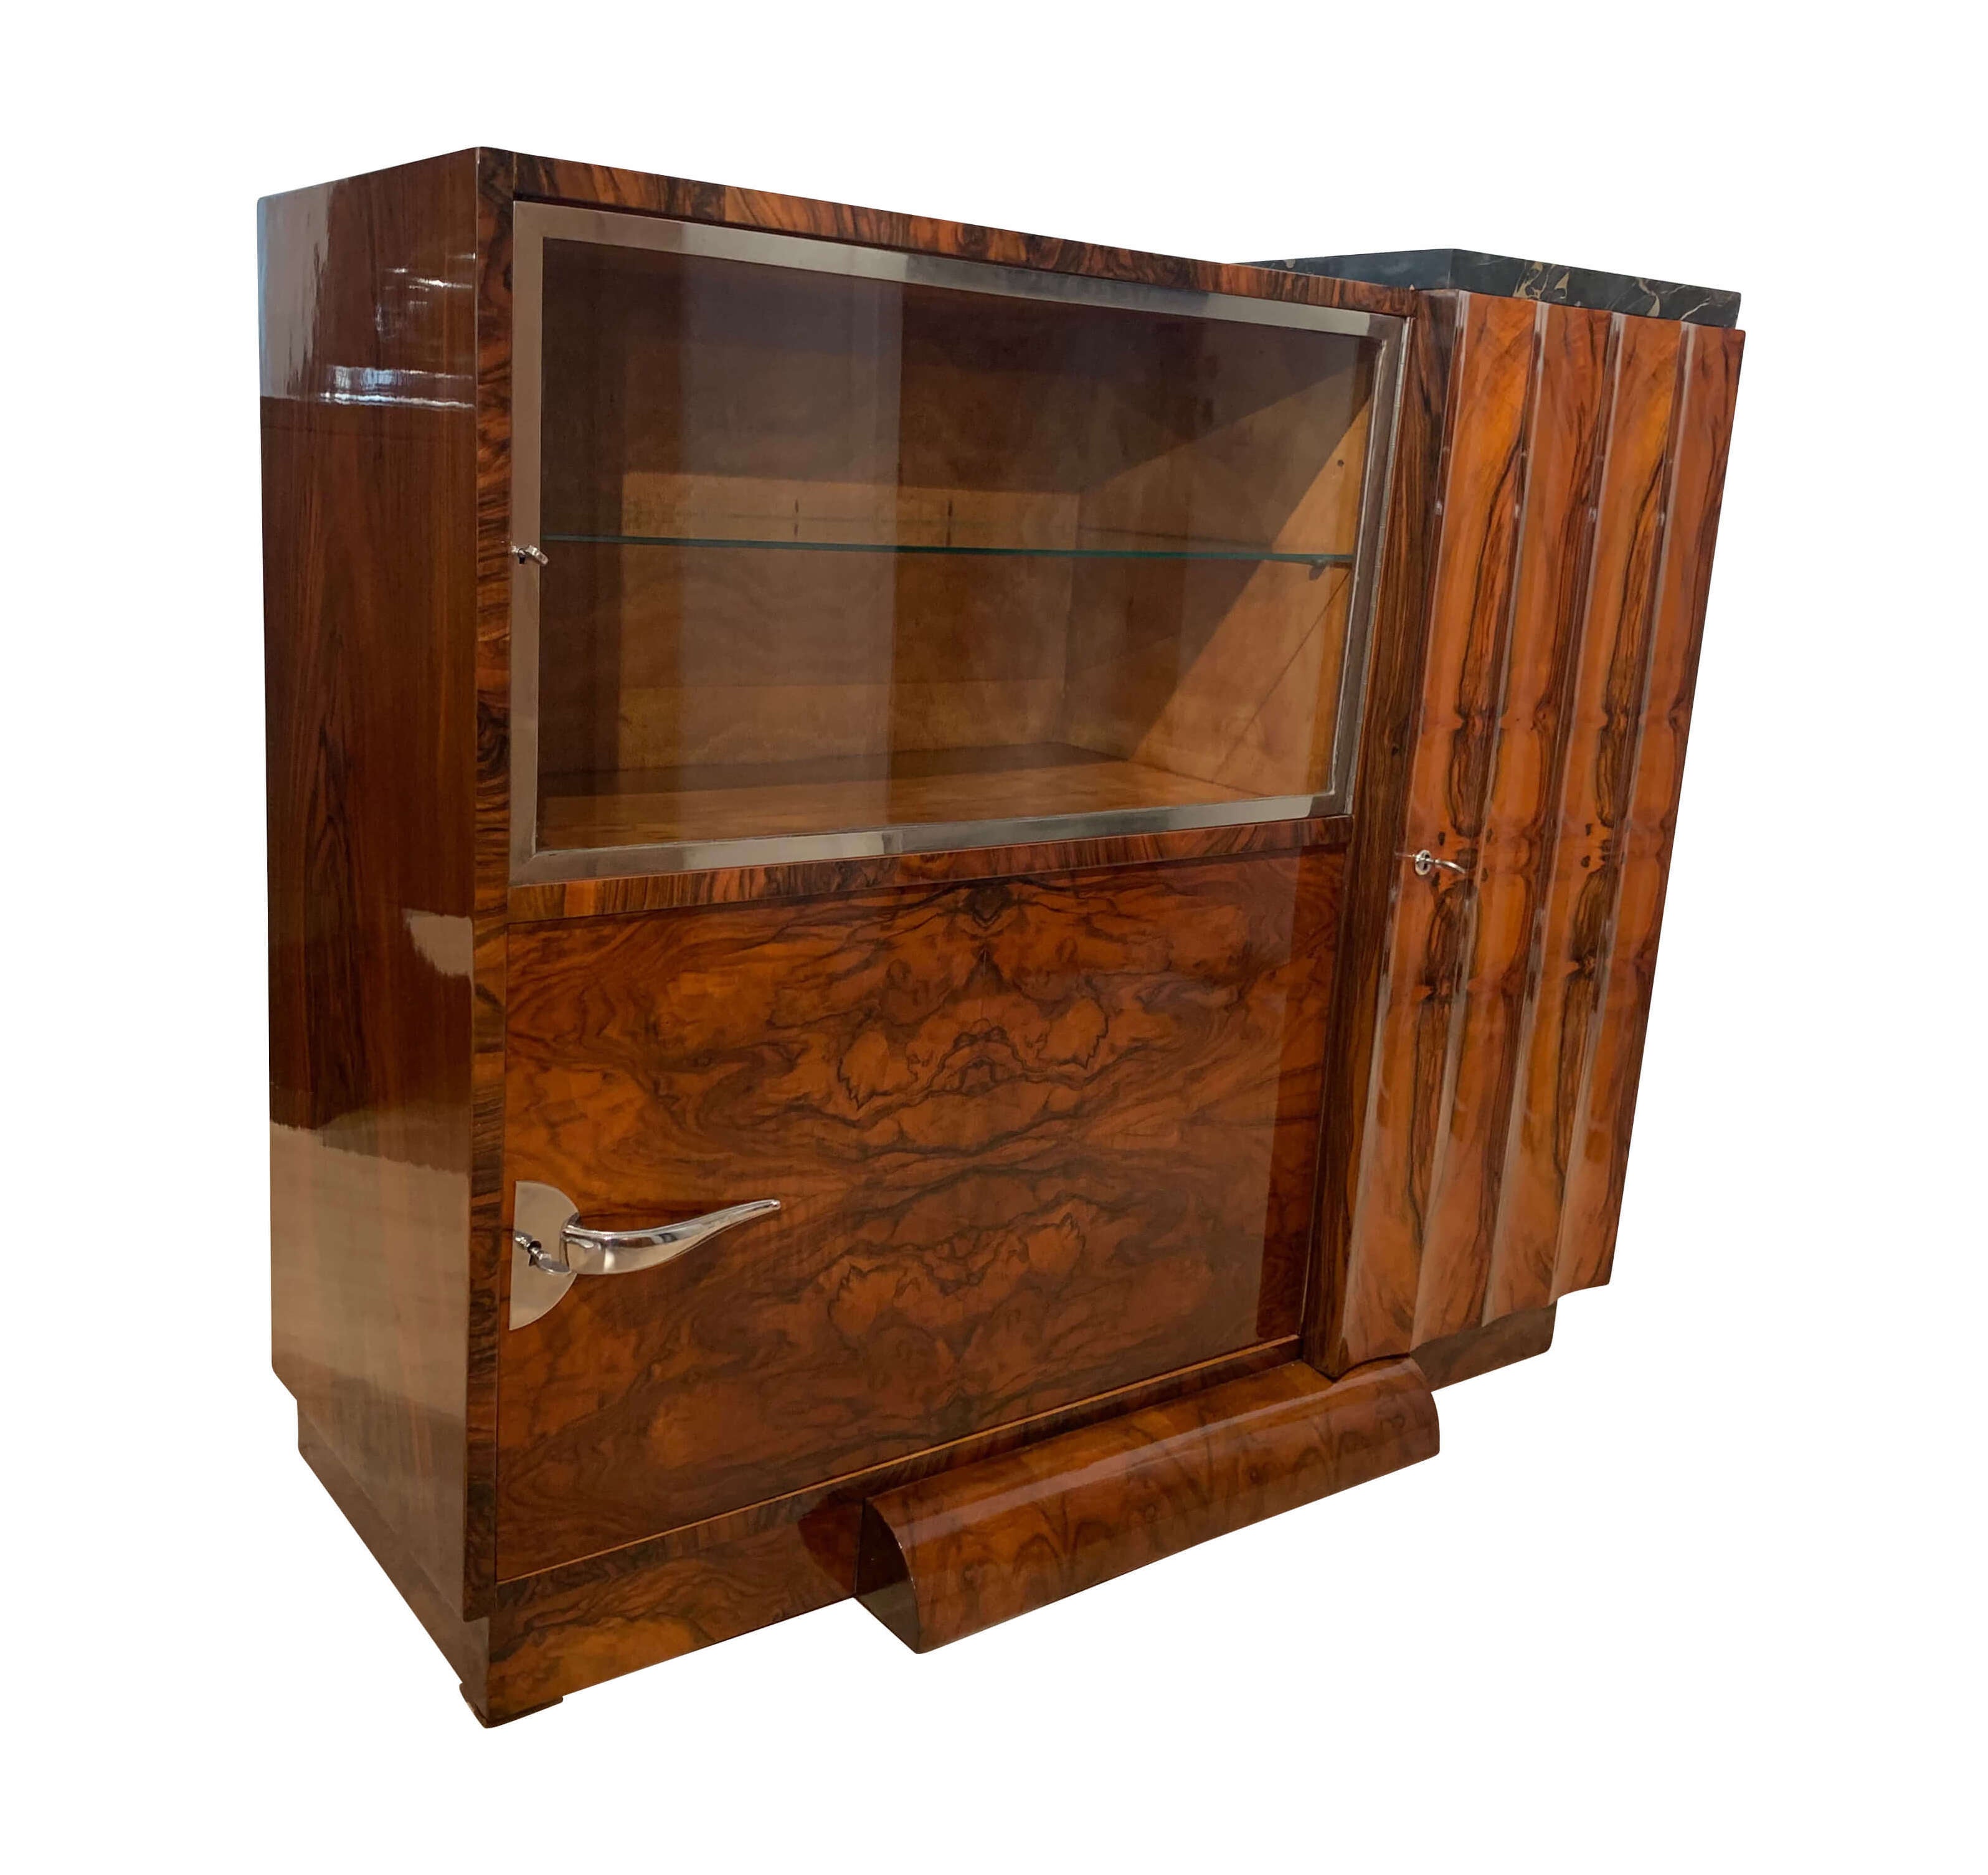 Elegant, rare Art Deco Sideboard  /Buffet from France around 1930.

Wonderful book-matched walnut veneer. Fluted / cannelured door with outstanding walnut veneer pattern, inside with two 2 shelves (stained solid beech). All the wood outside has